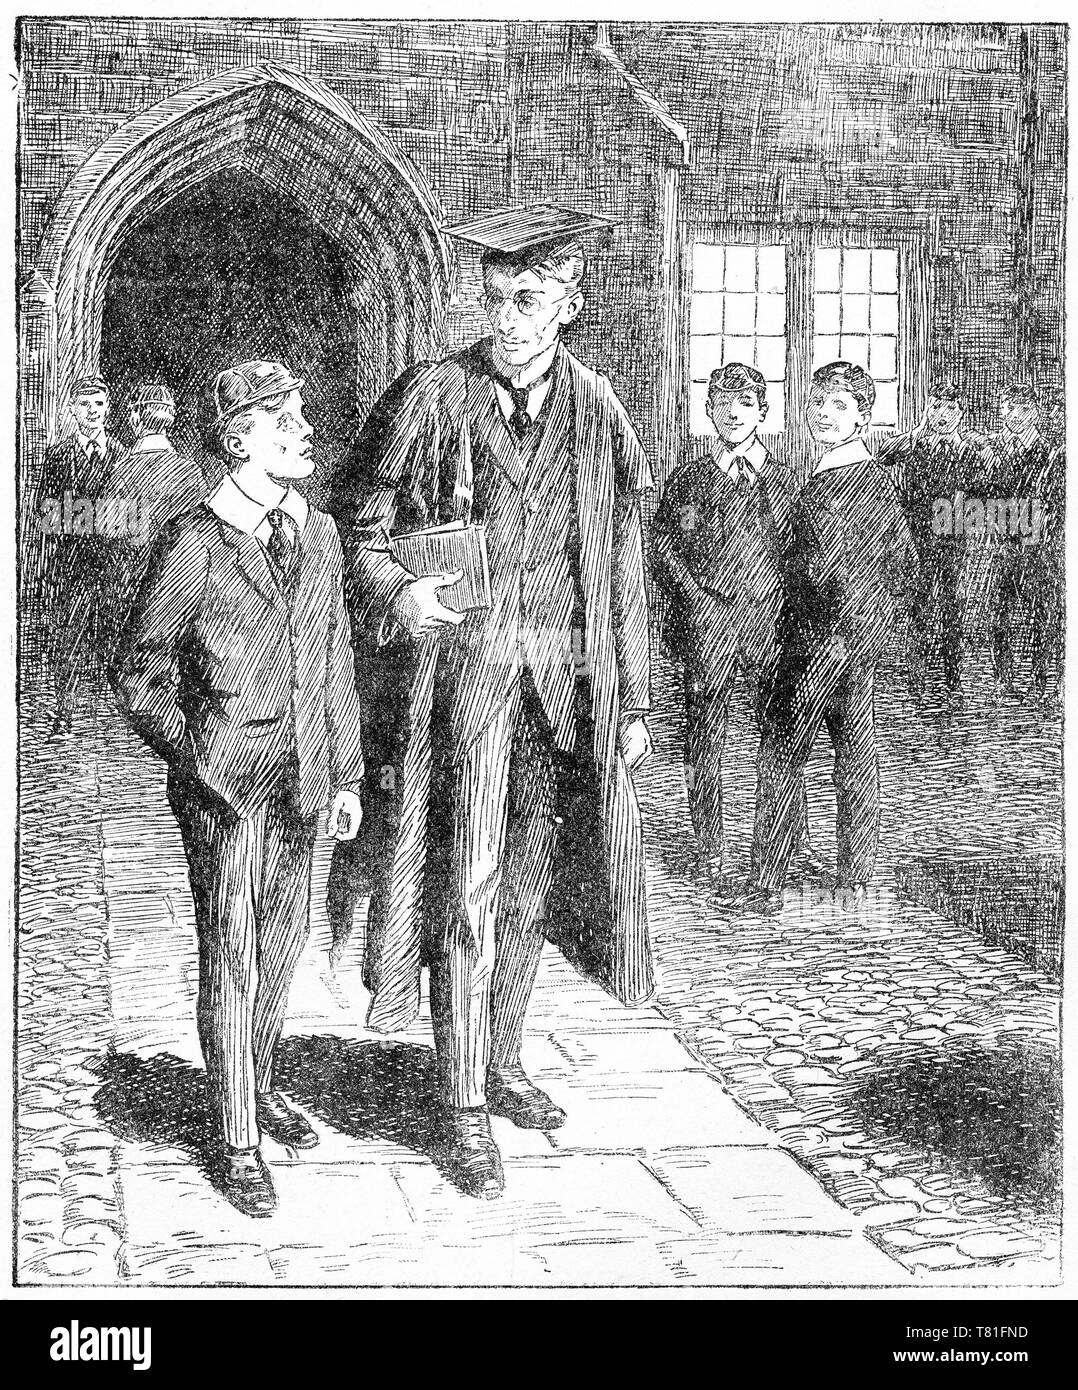 Engraving of a school teacher and student at an old private school in England. Chatterbox magazine, 1917 Stock Photo